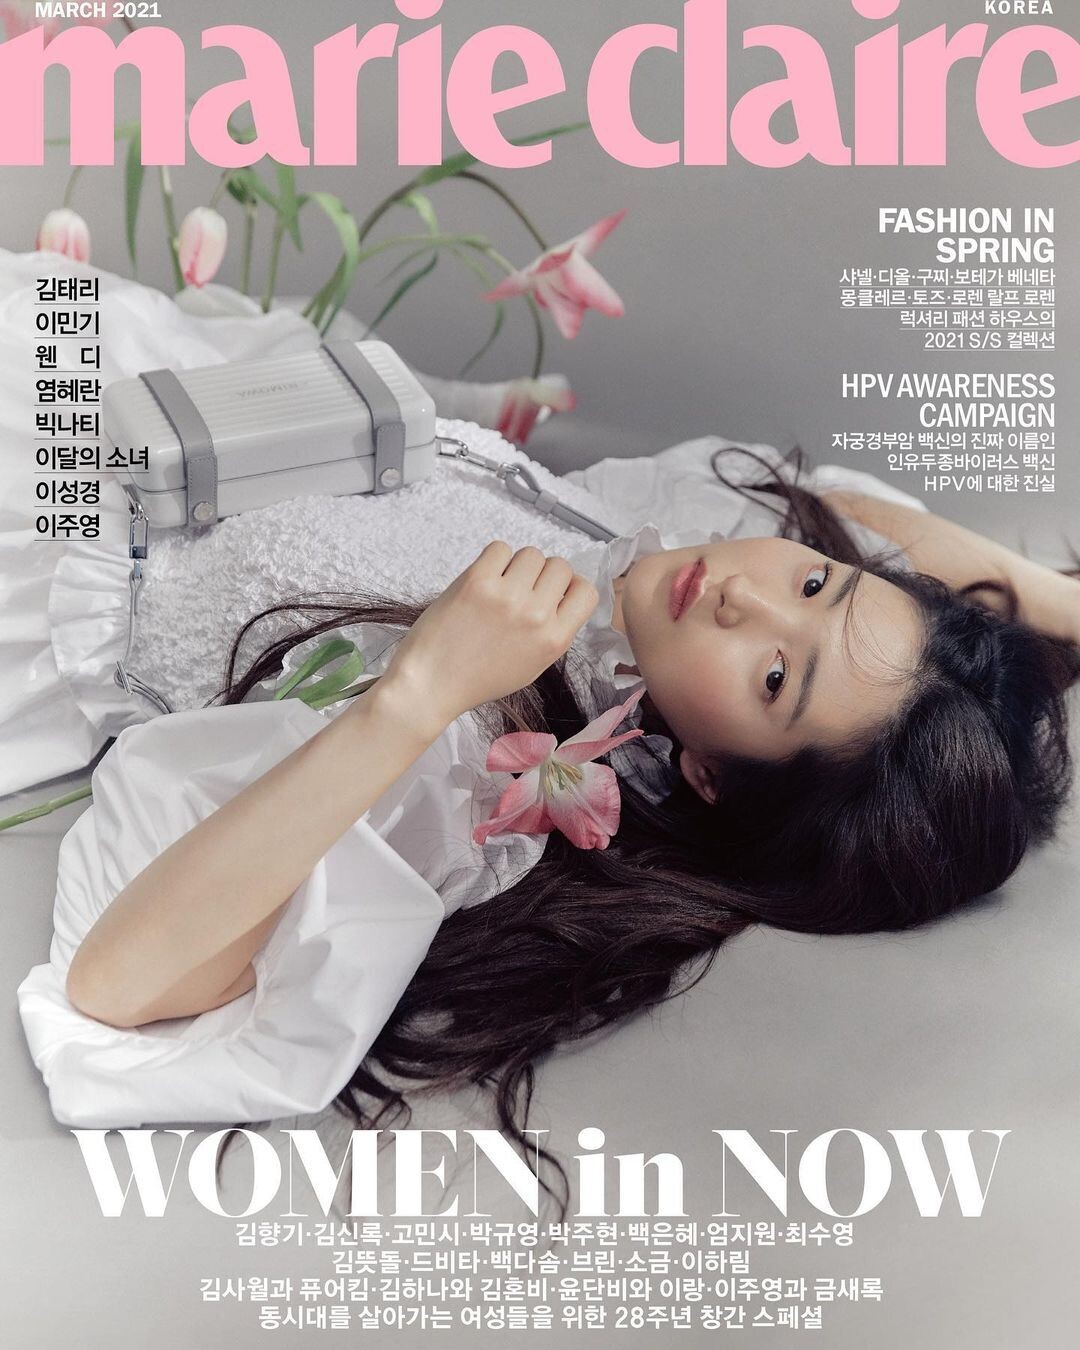 [ONHAND] Marie Claire March 2021 Magazine Cover: Kim Tae Ri